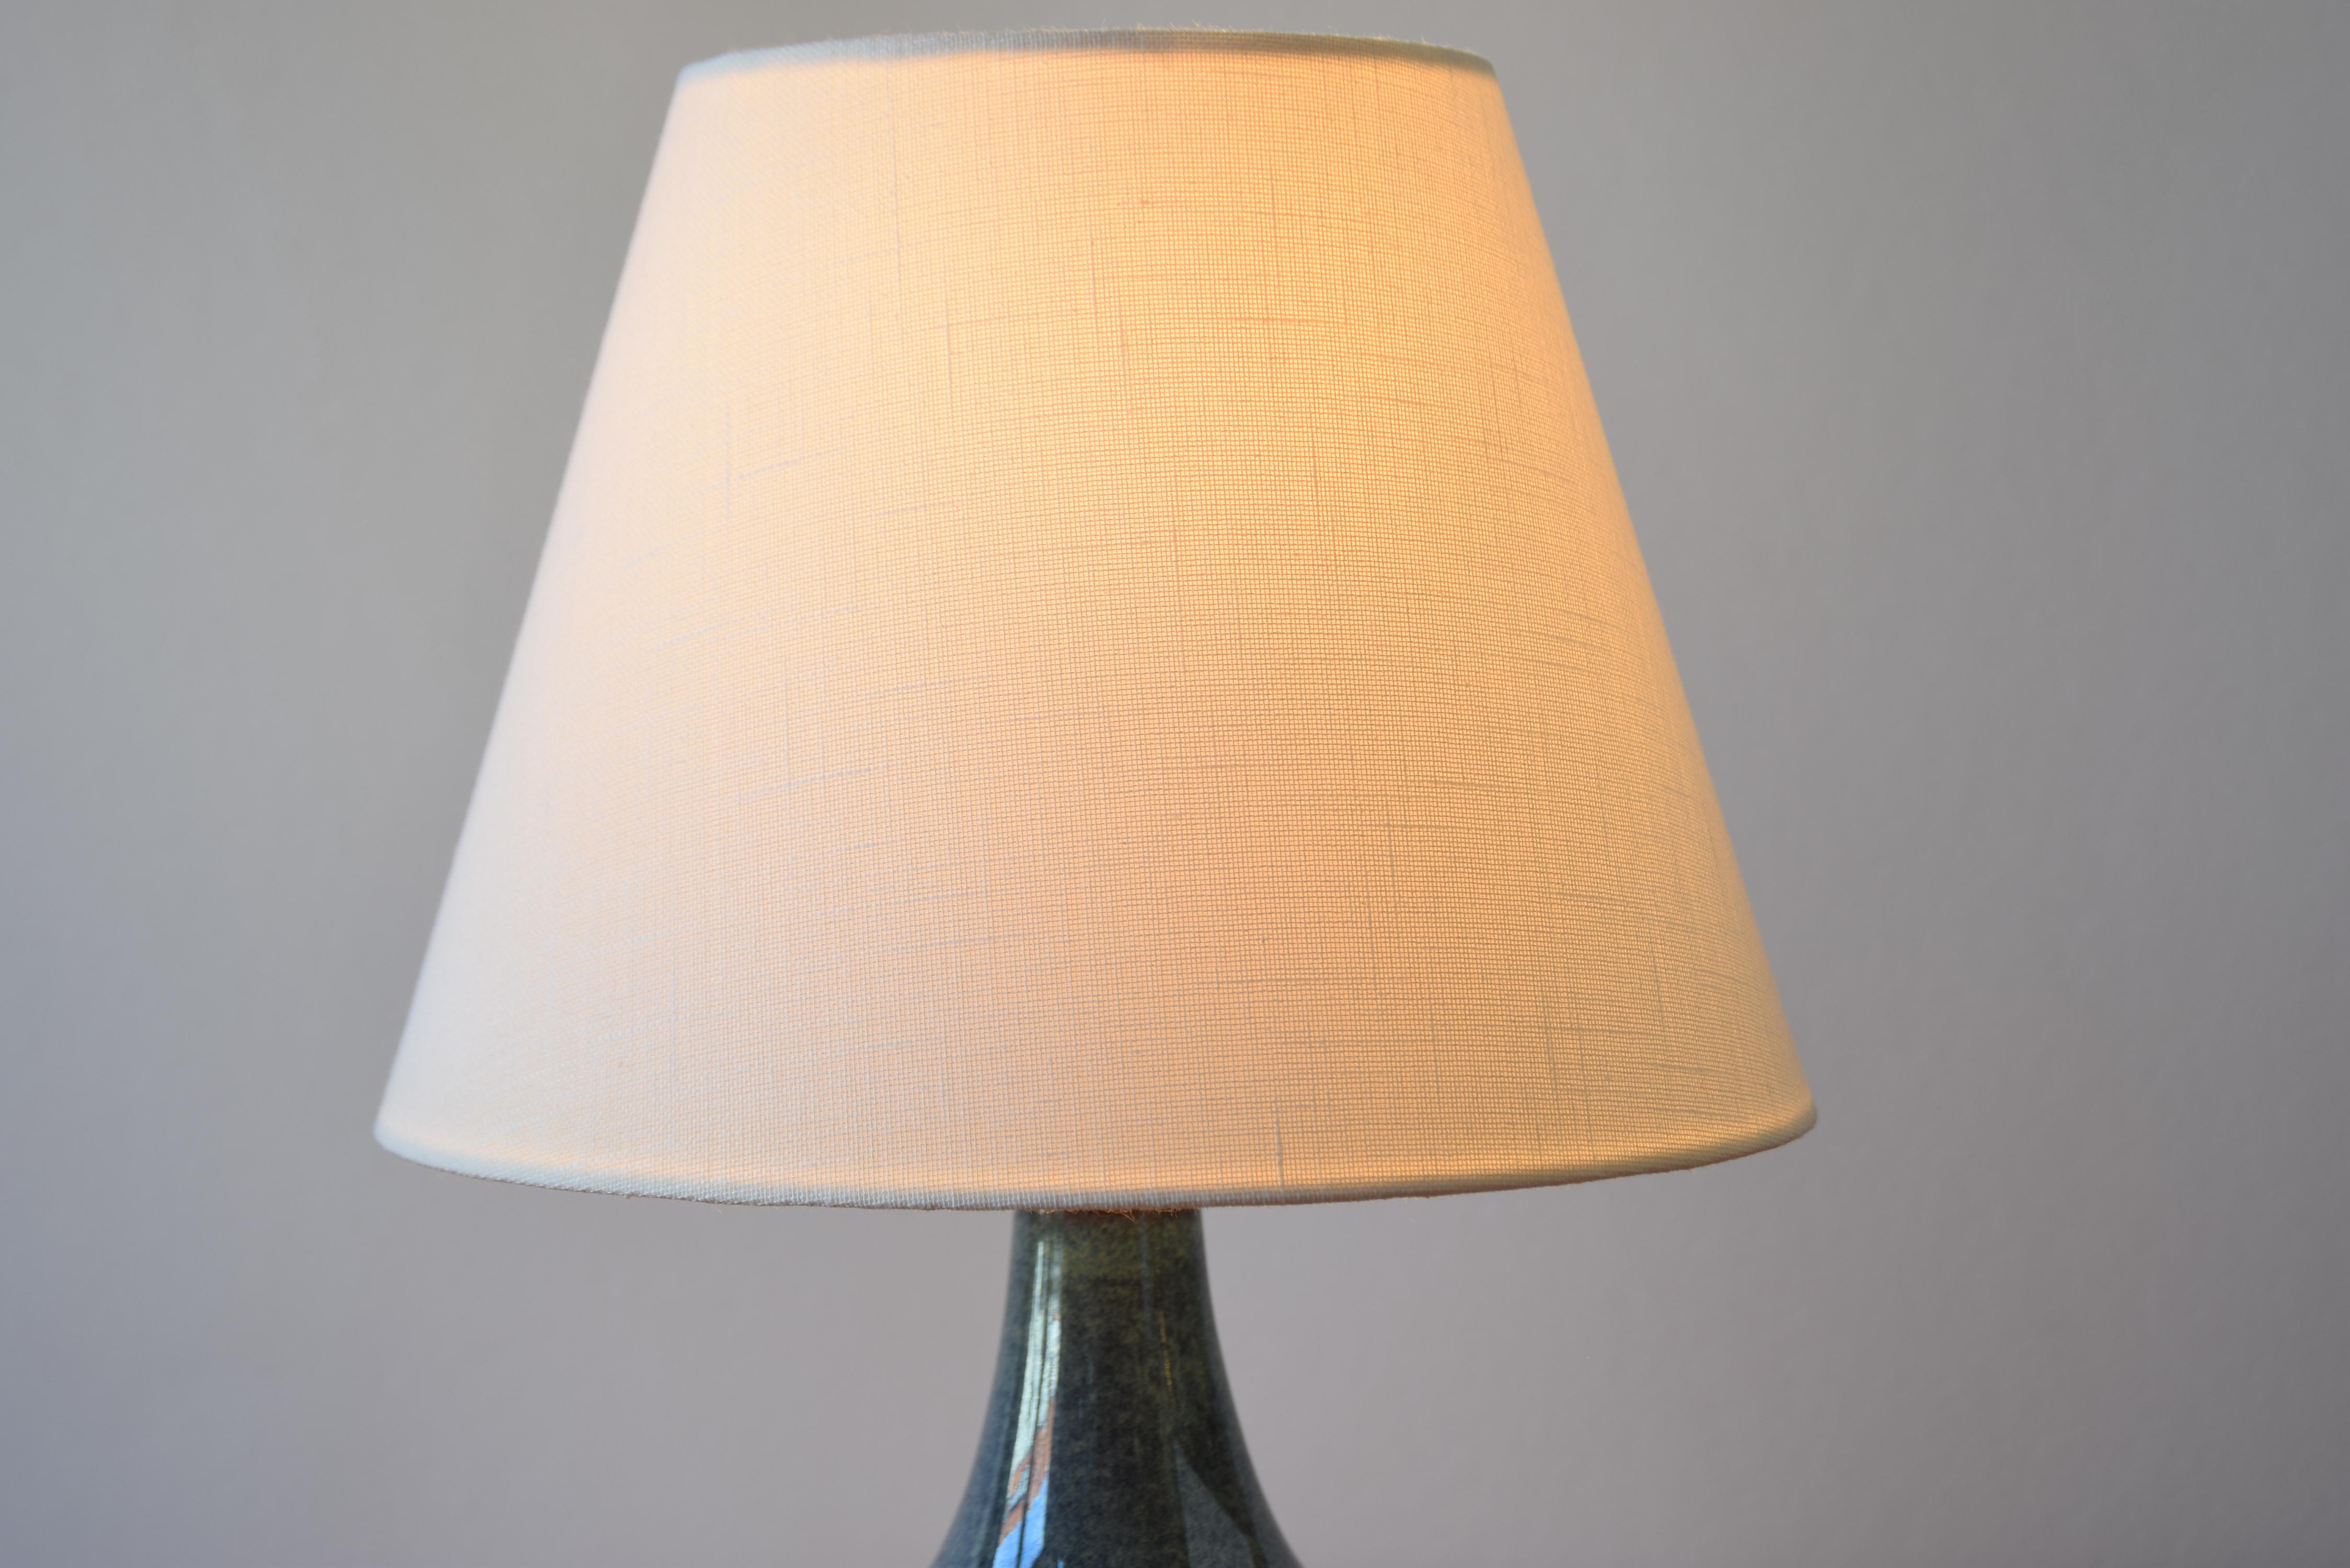 Danish Midcentury Søholm Ceramic Table Lamp in Blue, Budded Shape, 1960s For Sale 4